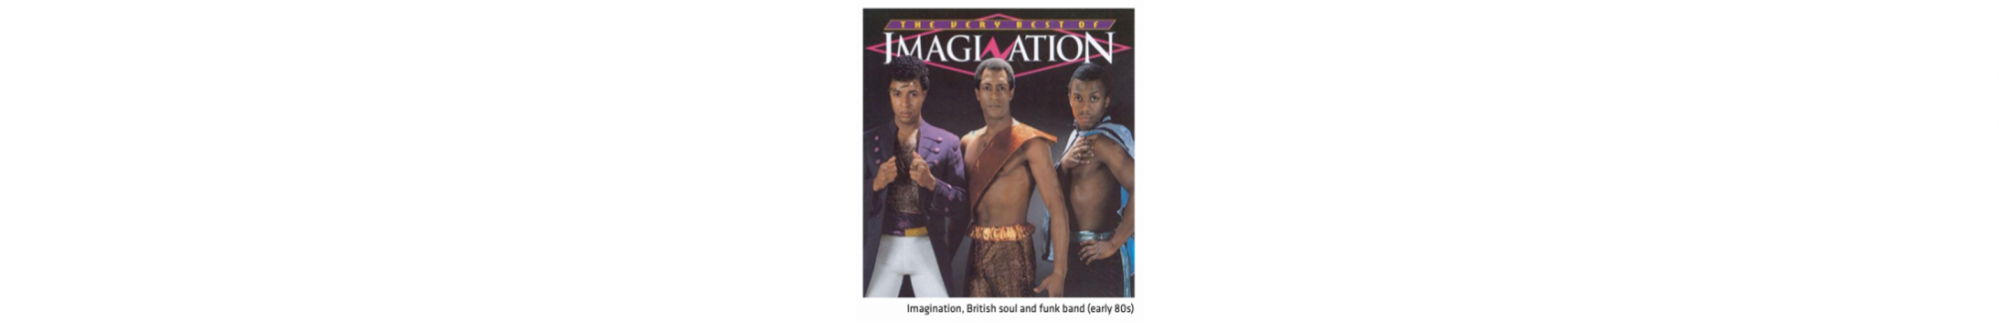 Imagination-day.png